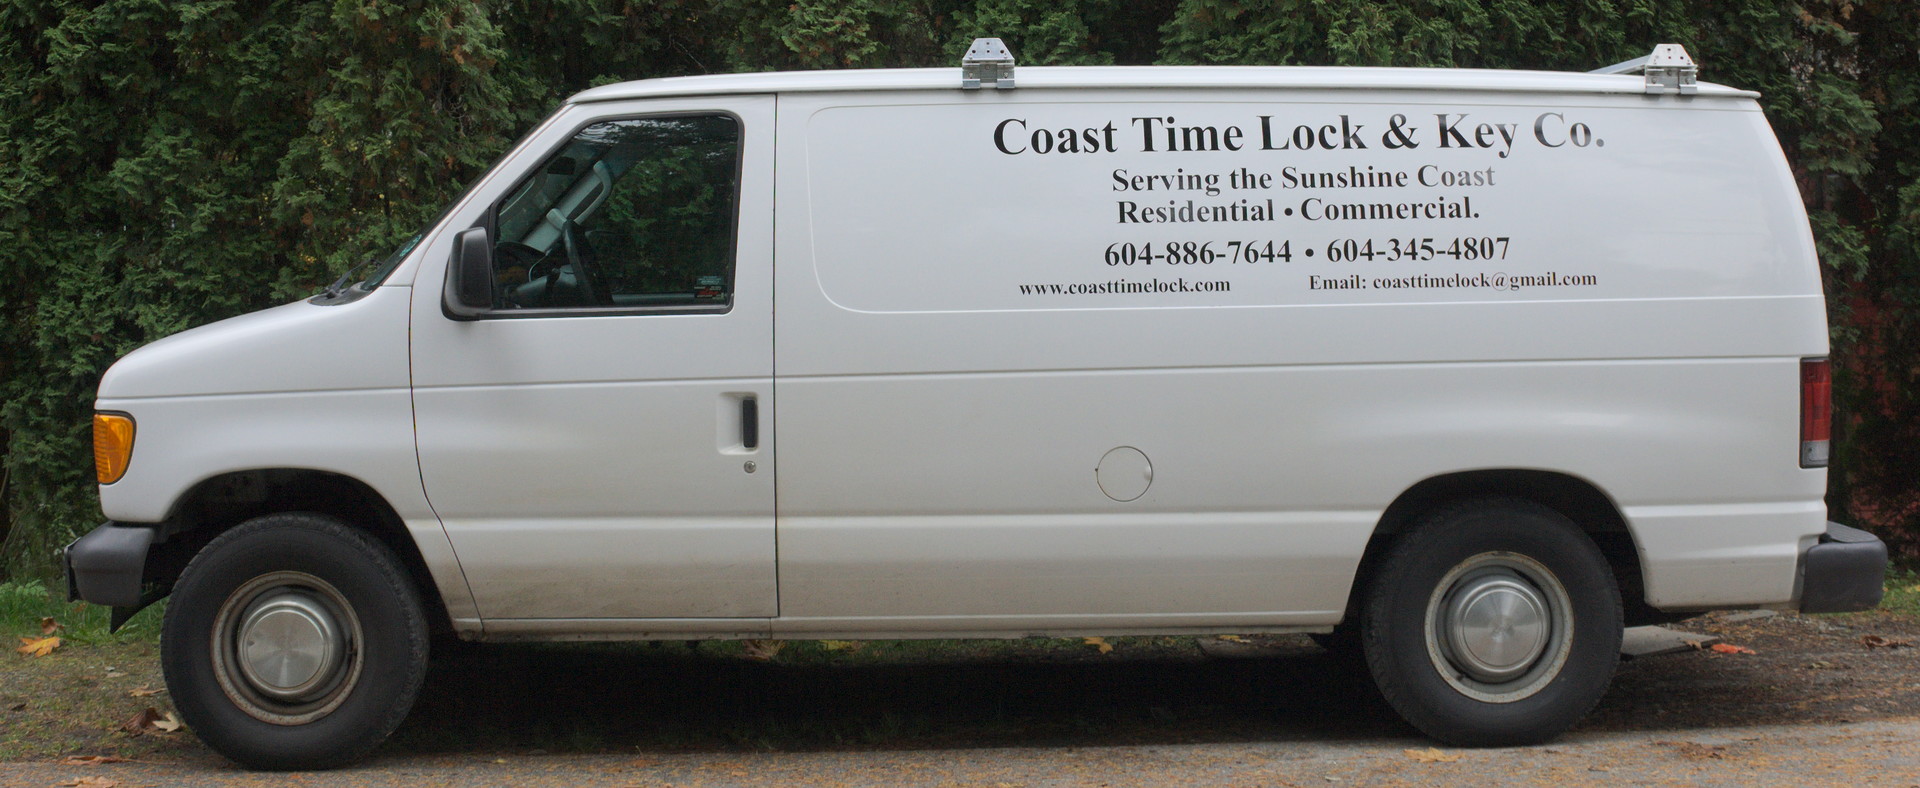 Locksmith service van for Gibsons, Sechelt and the Sunshine Coast in BC